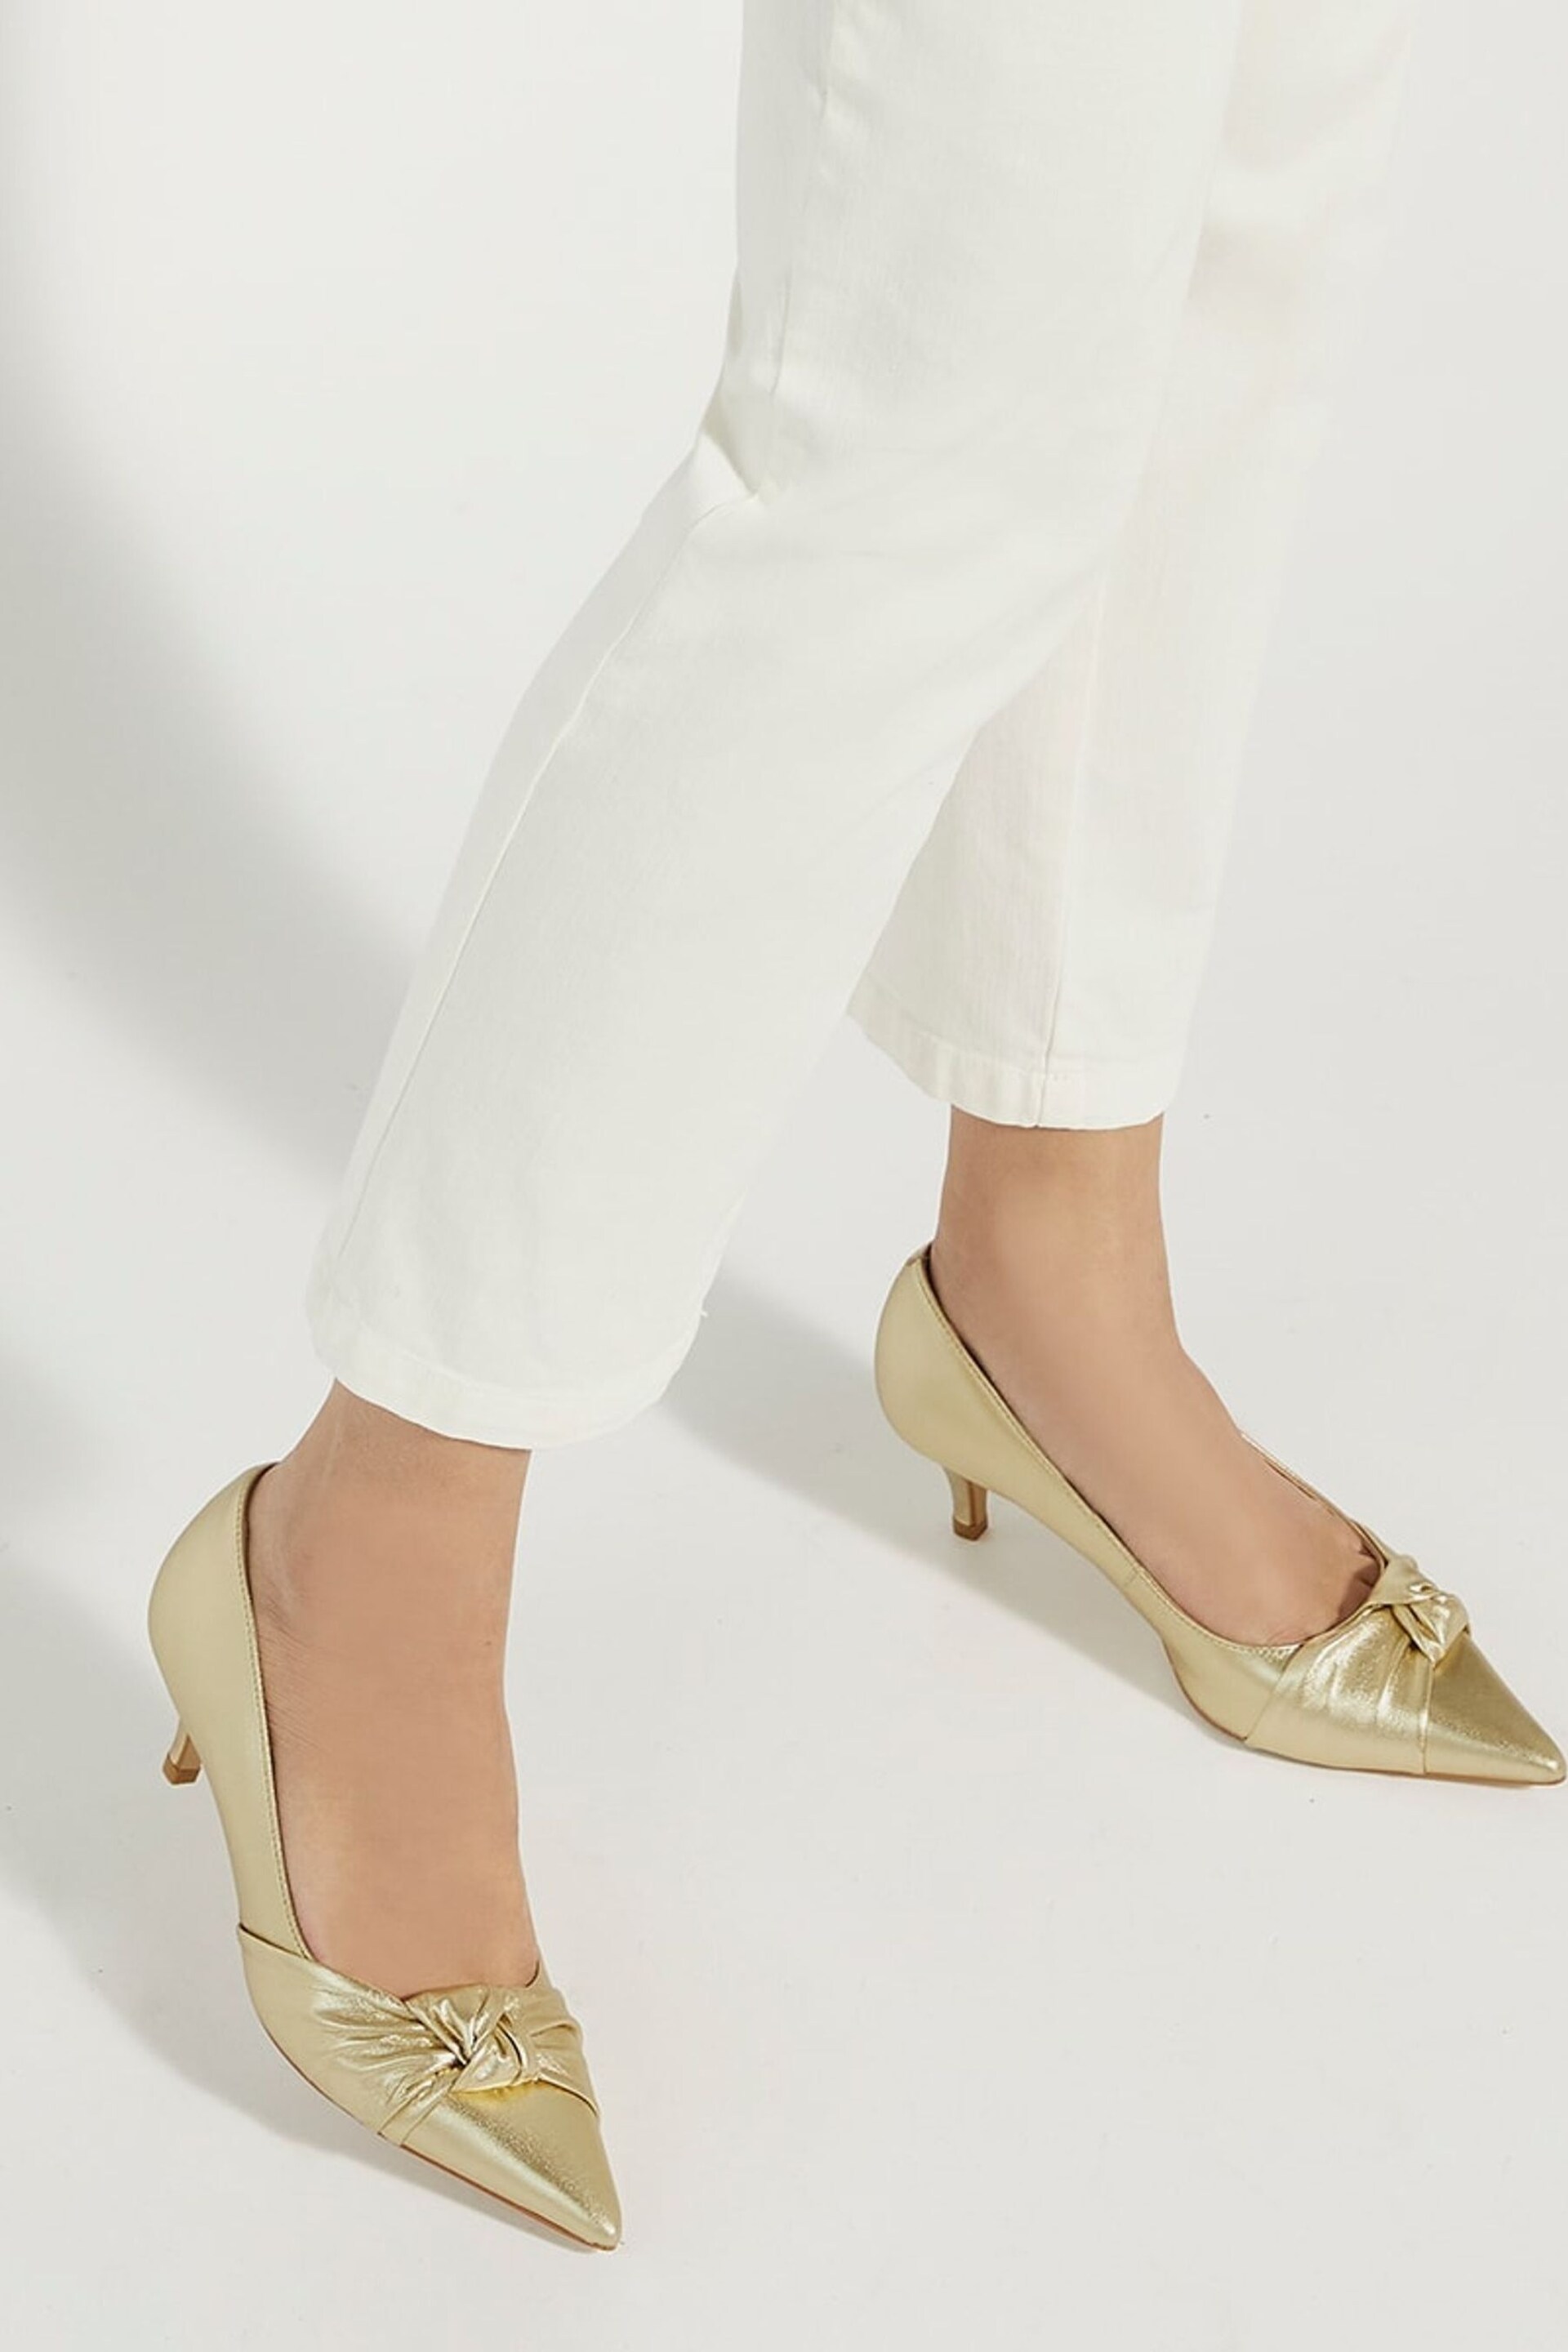 Dune London Gold Address Soft Knot Pointed Court Shoes - Image 3 of 6